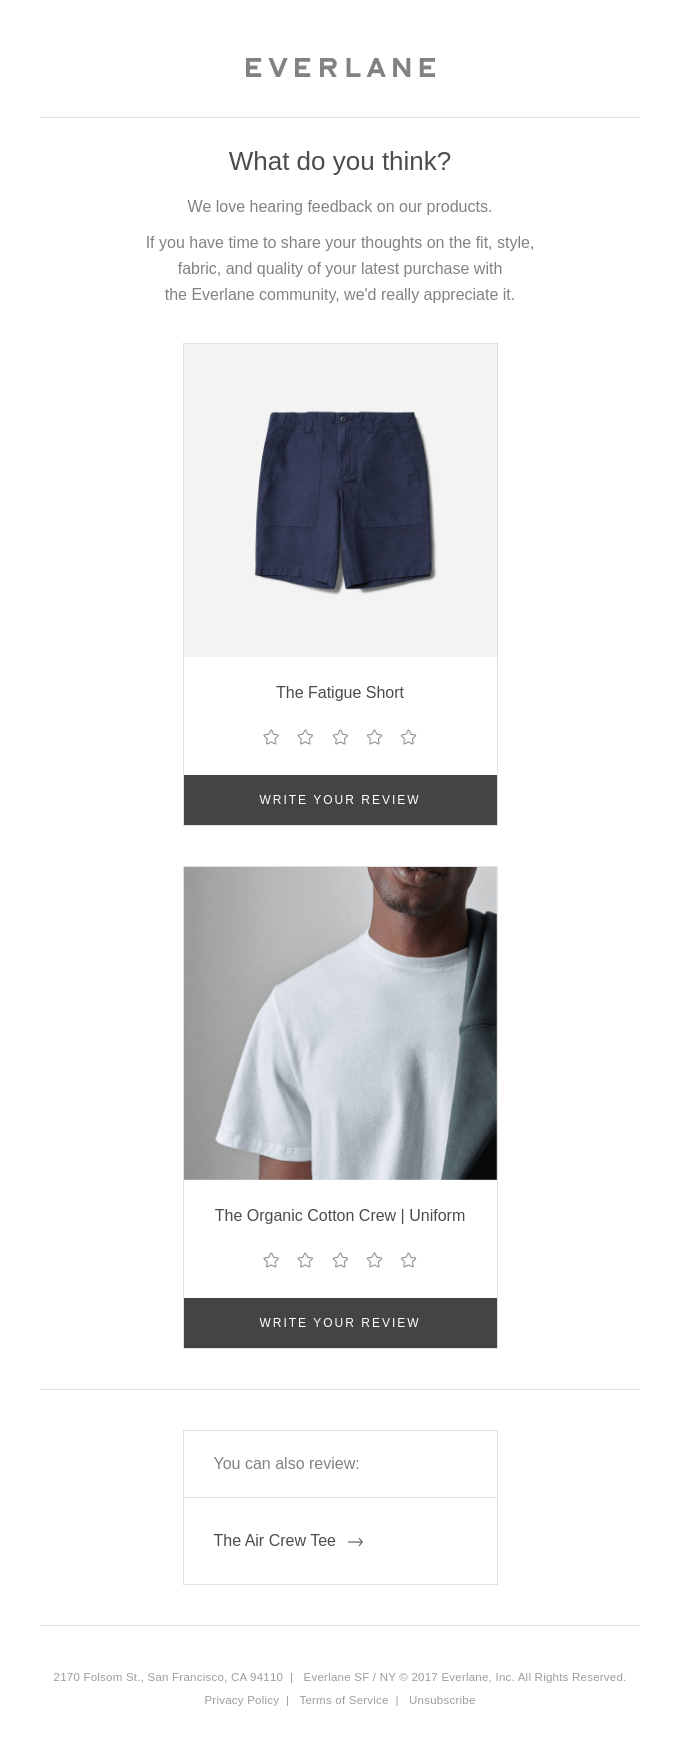 Review request email from Everlane